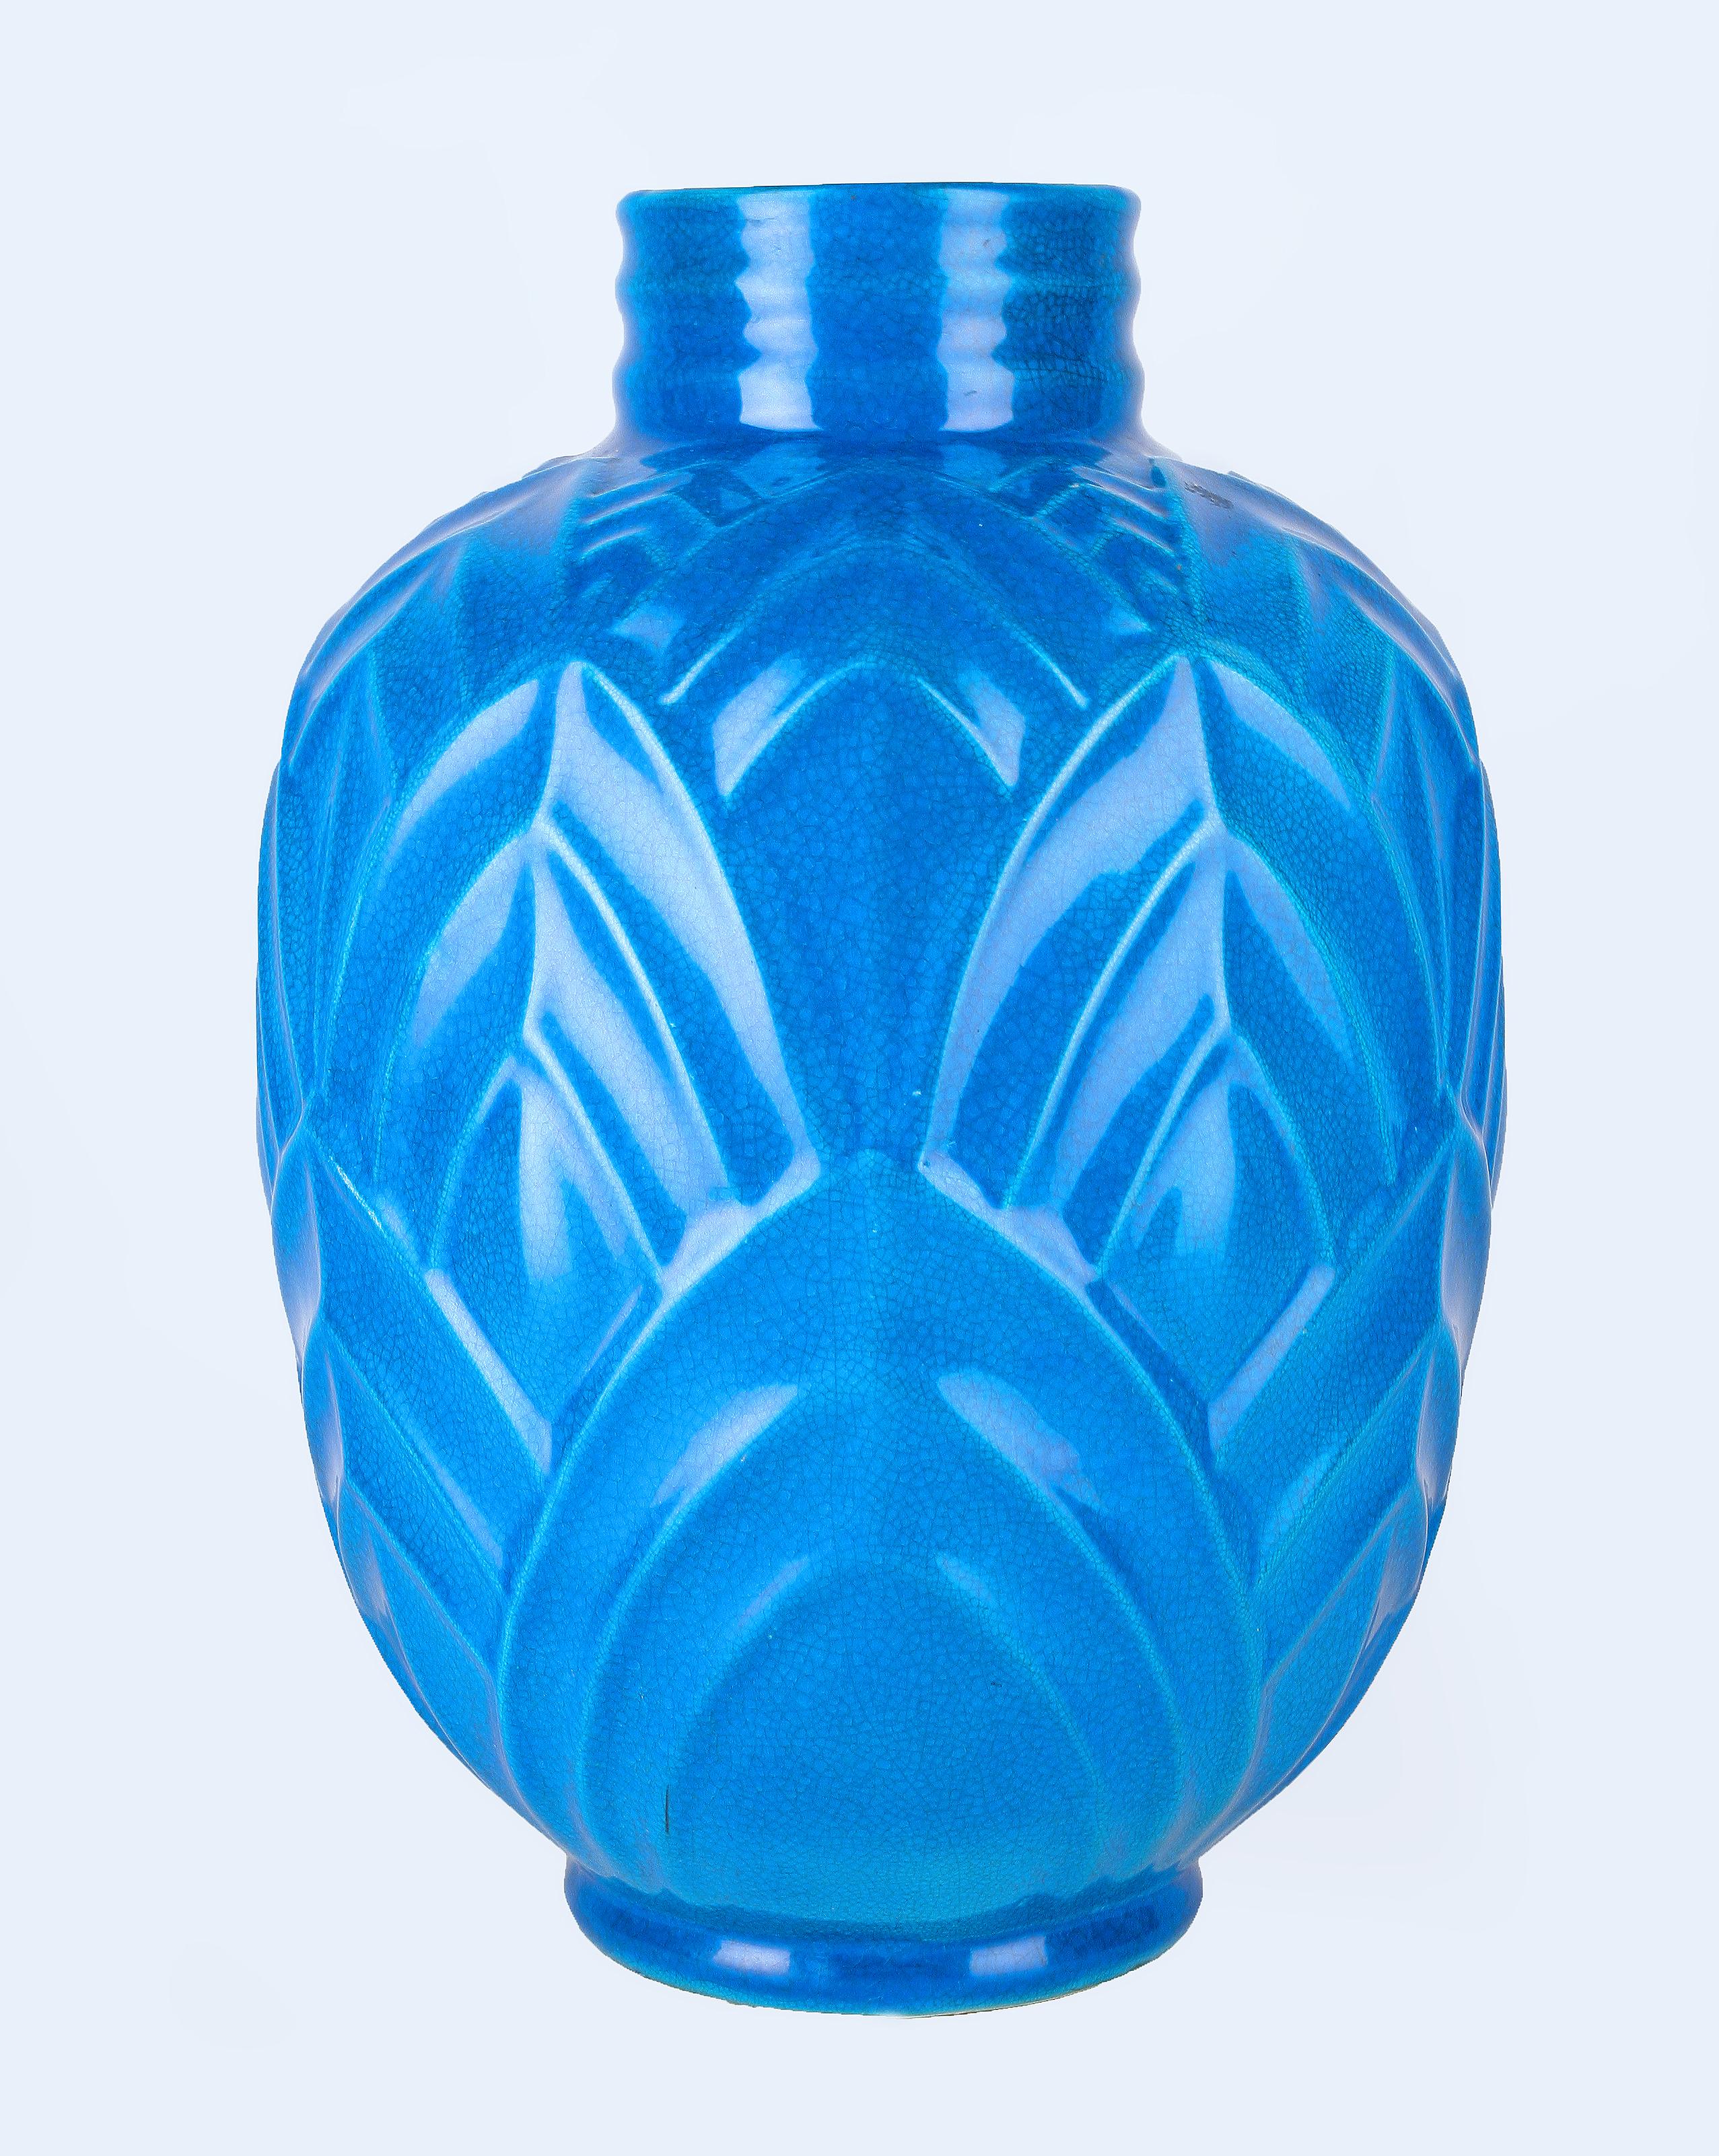 Early 20th centuyr Art Déco blue glazed ceramic/earthenware vase by french designer Charles Catteau for belgian factory Boch Frères Keramis

By: Charles Catteau, Boch Frères Keramis, René Lalique (in the style of)
Material: ceramic, clay,